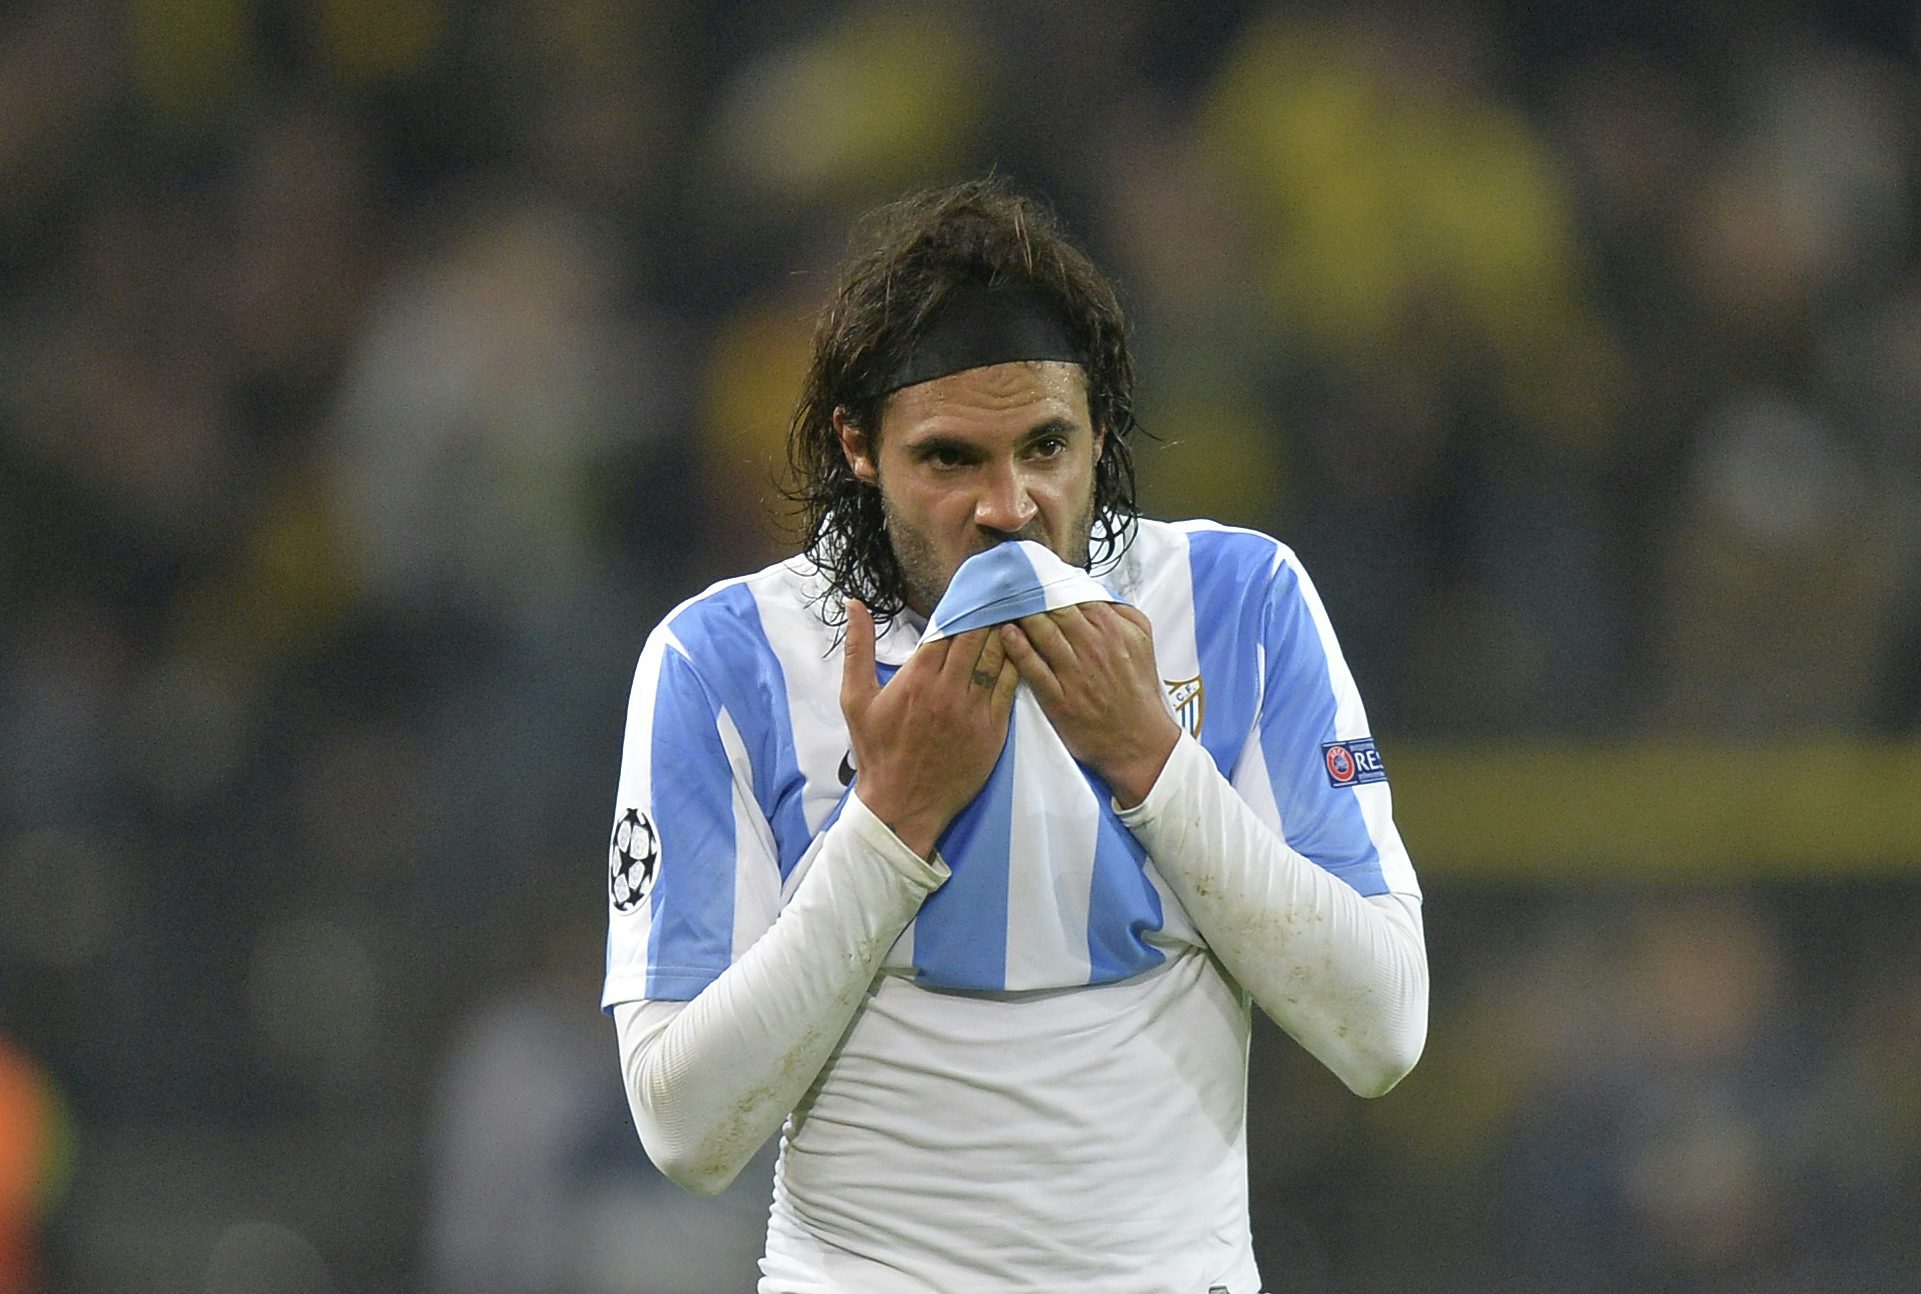 Malaga's Sergio Sanchez reacts during a Champions League match on April 9, 2013